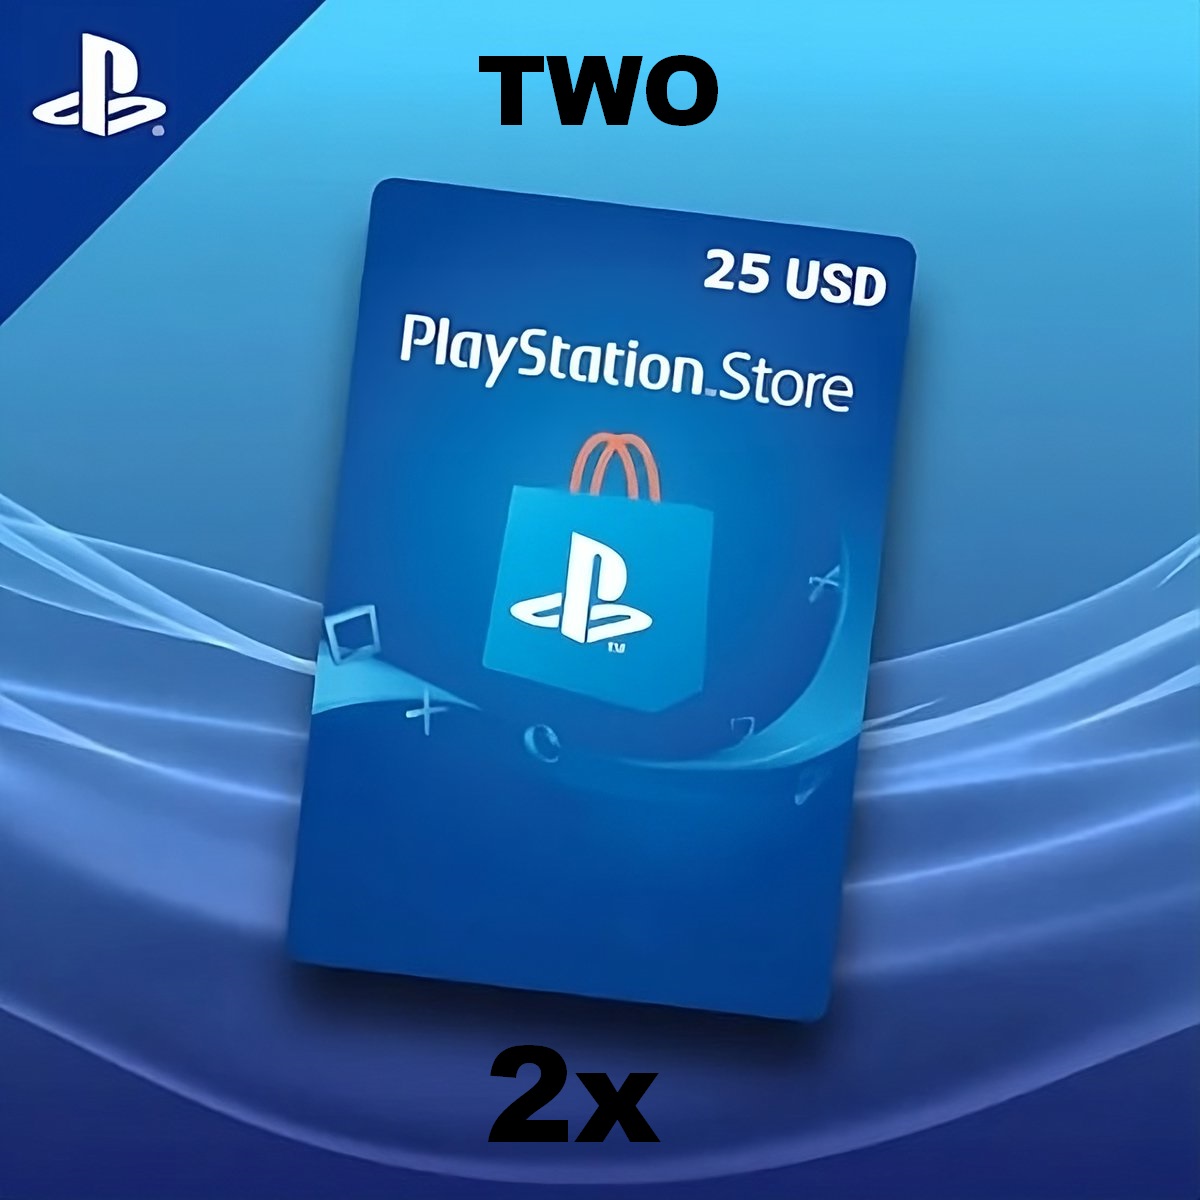 LIGHTNING ROUND GIVEAWAY (24 Hour Giveaway): I'm giving away: ⚫TWO $25 Dollar PlayStation Store cards! To ENTER: 1️⃣Follow 2️⃣Like & Retweet 3️⃣Comment what you wanna buy! Winners will be announced TOMORROW (May 2nd) at 6PM PST #Giveaways #PlayStation #Giveaway #GiveawayAlert